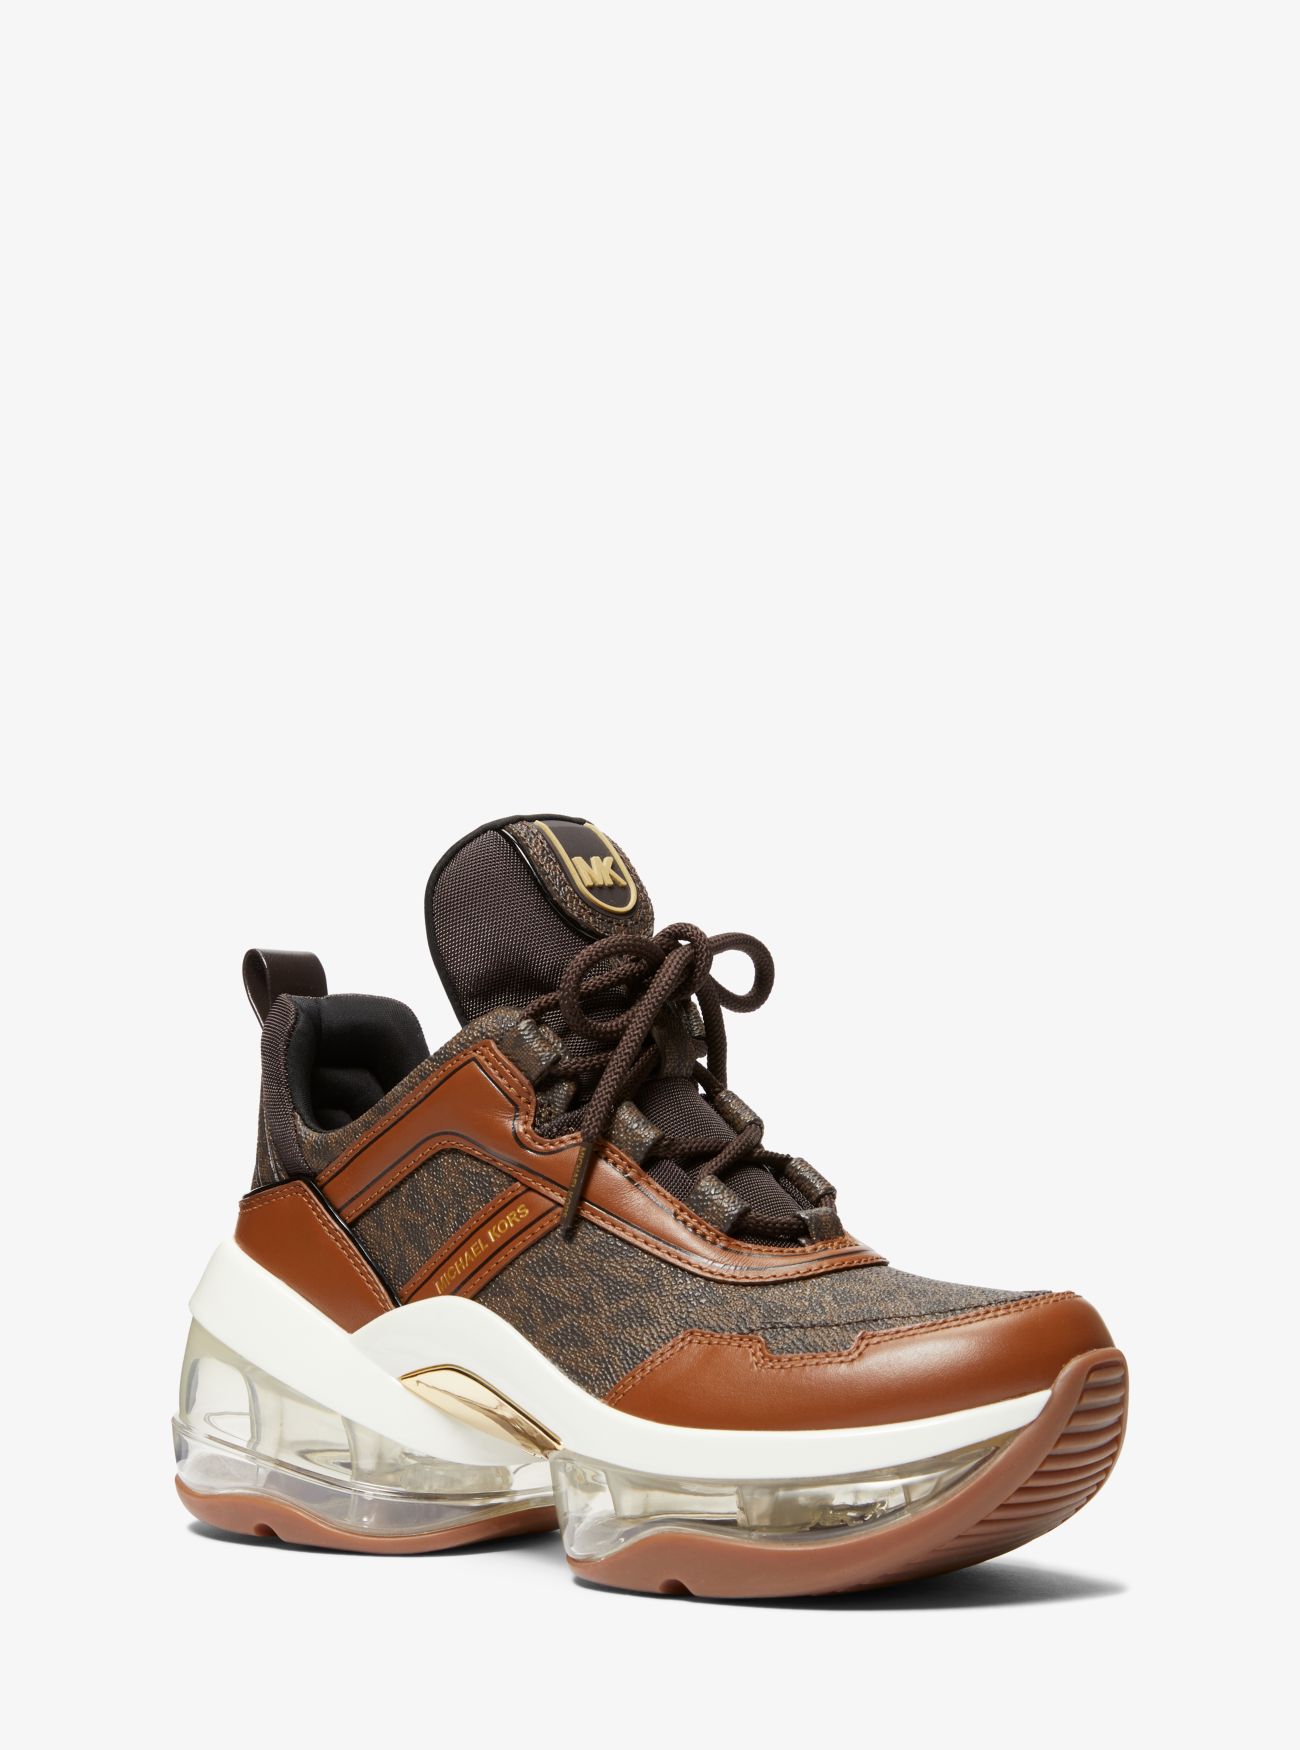 MK Olympia Extreme Logo and Leather Trainer - Brown - Michael Kors